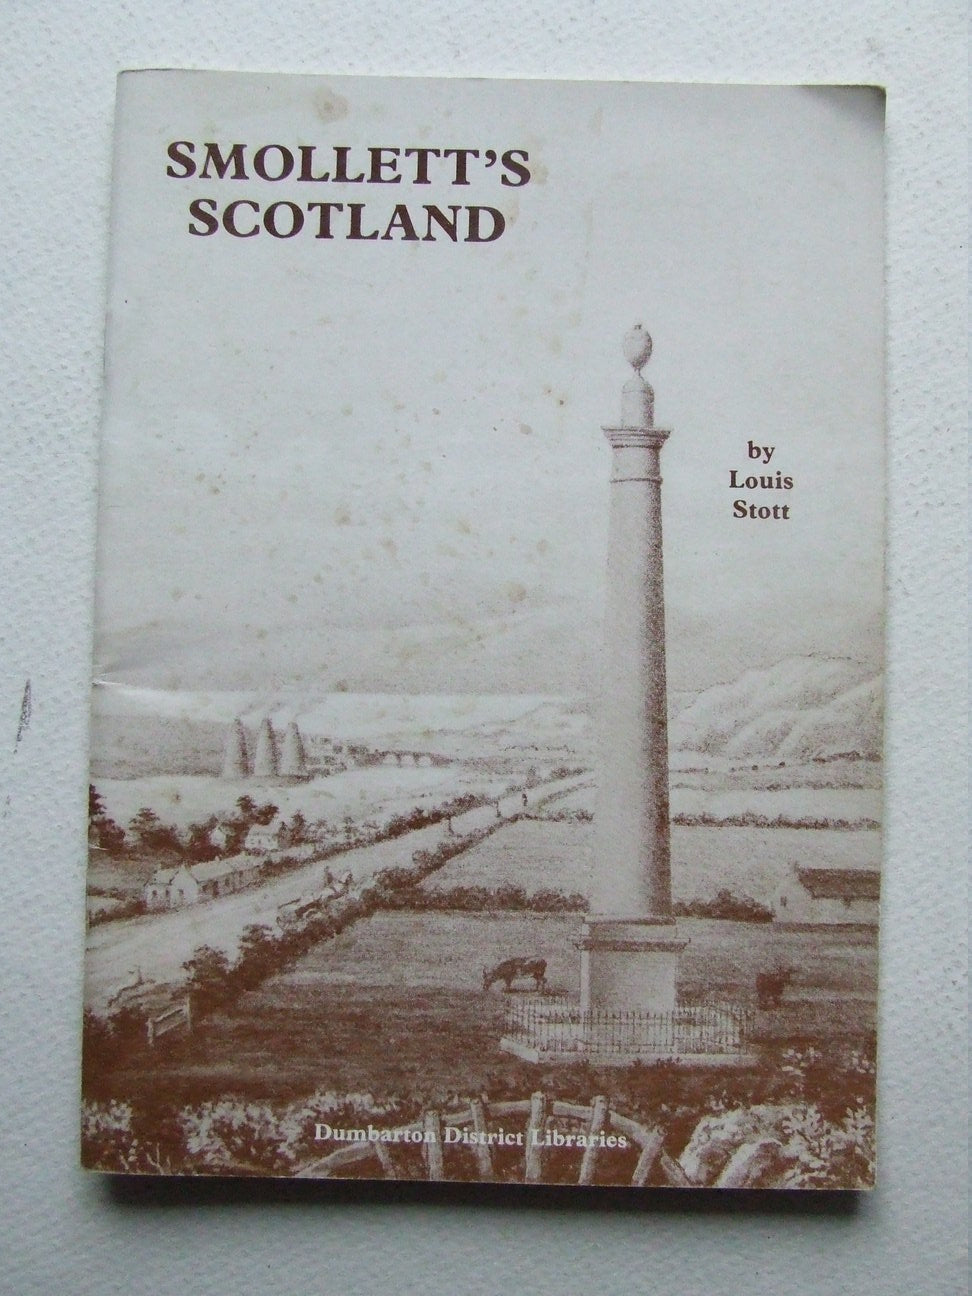 Smollett's Scotland, an illustrated guide for visitors